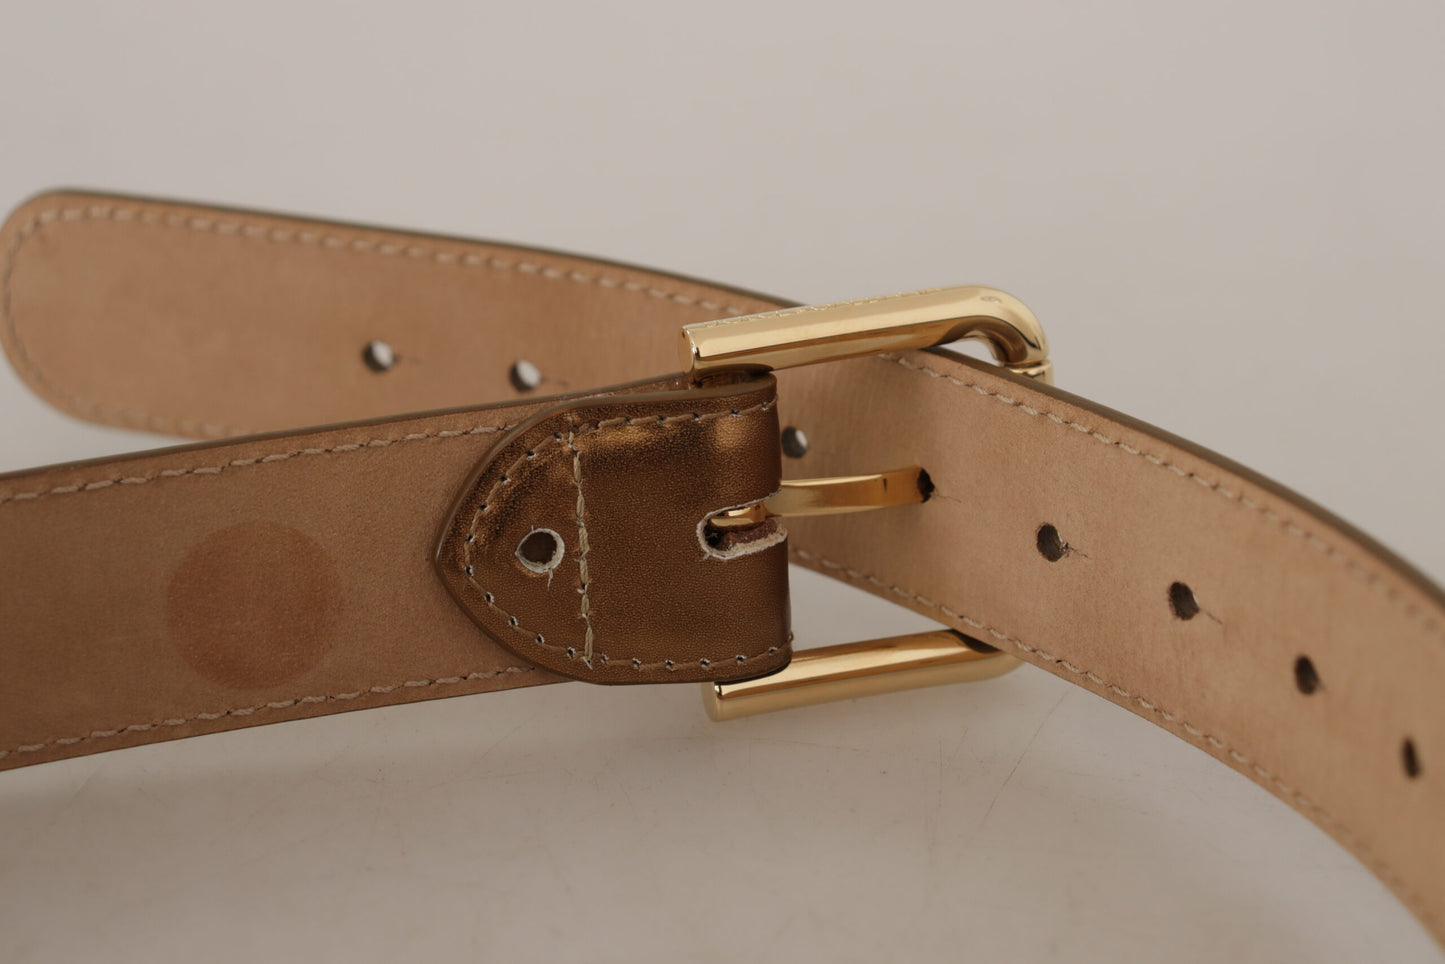 Bronze Leather Belt with Gold-Toned Buckle